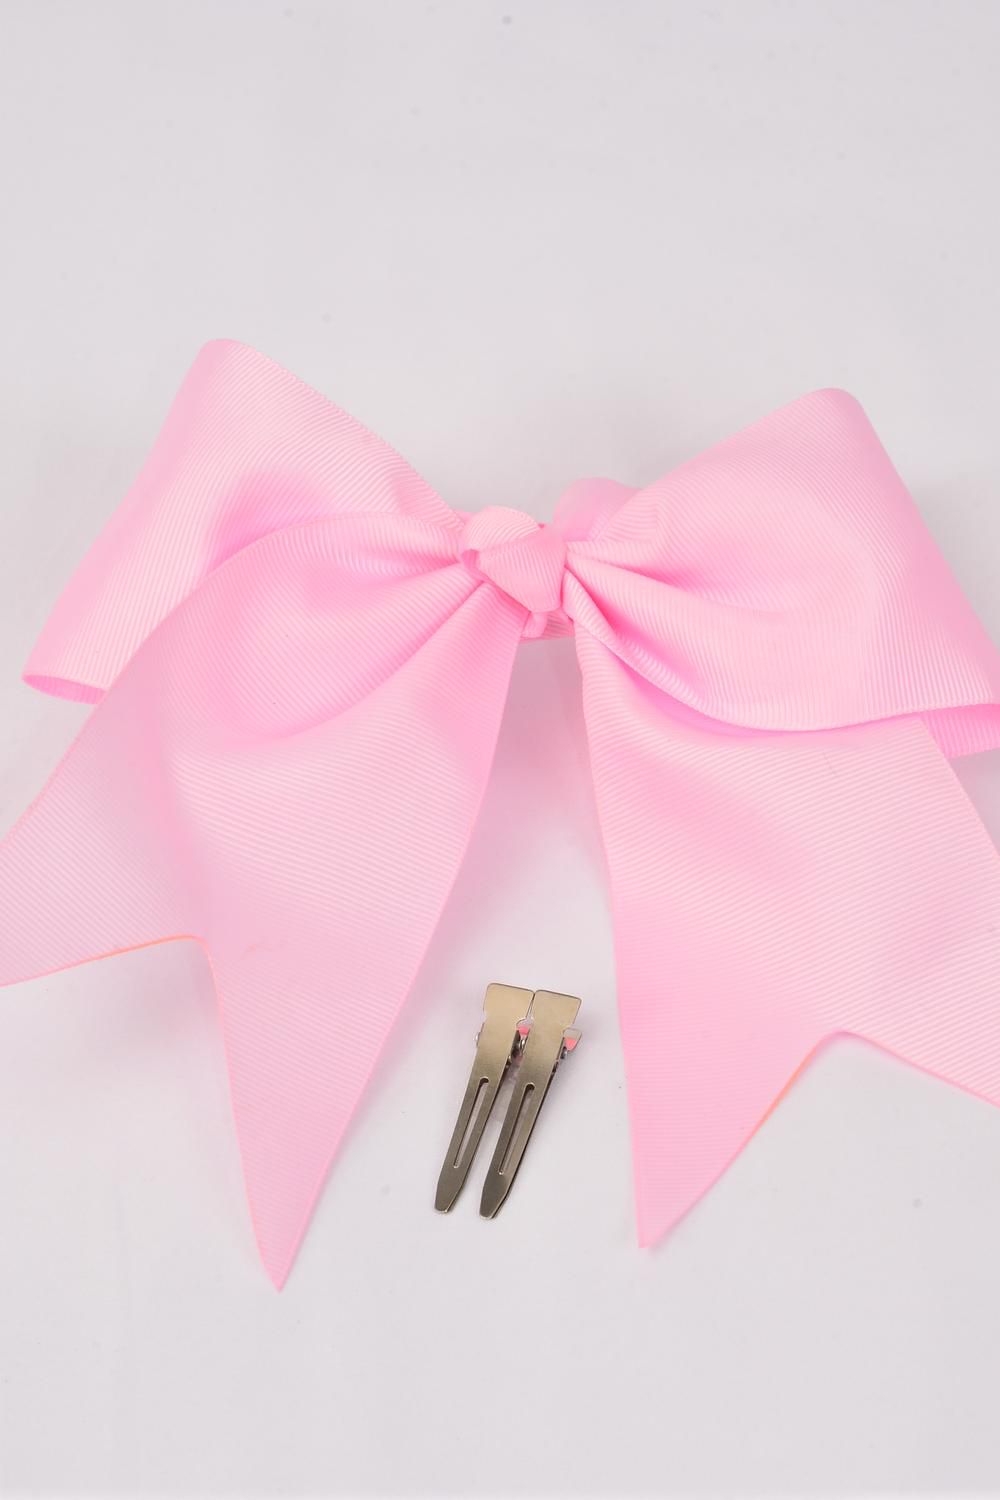 Hair Bow Extra Jumbo Long Tail Baby Pink Grosgrain Bow-tie/DZ **Baby ...